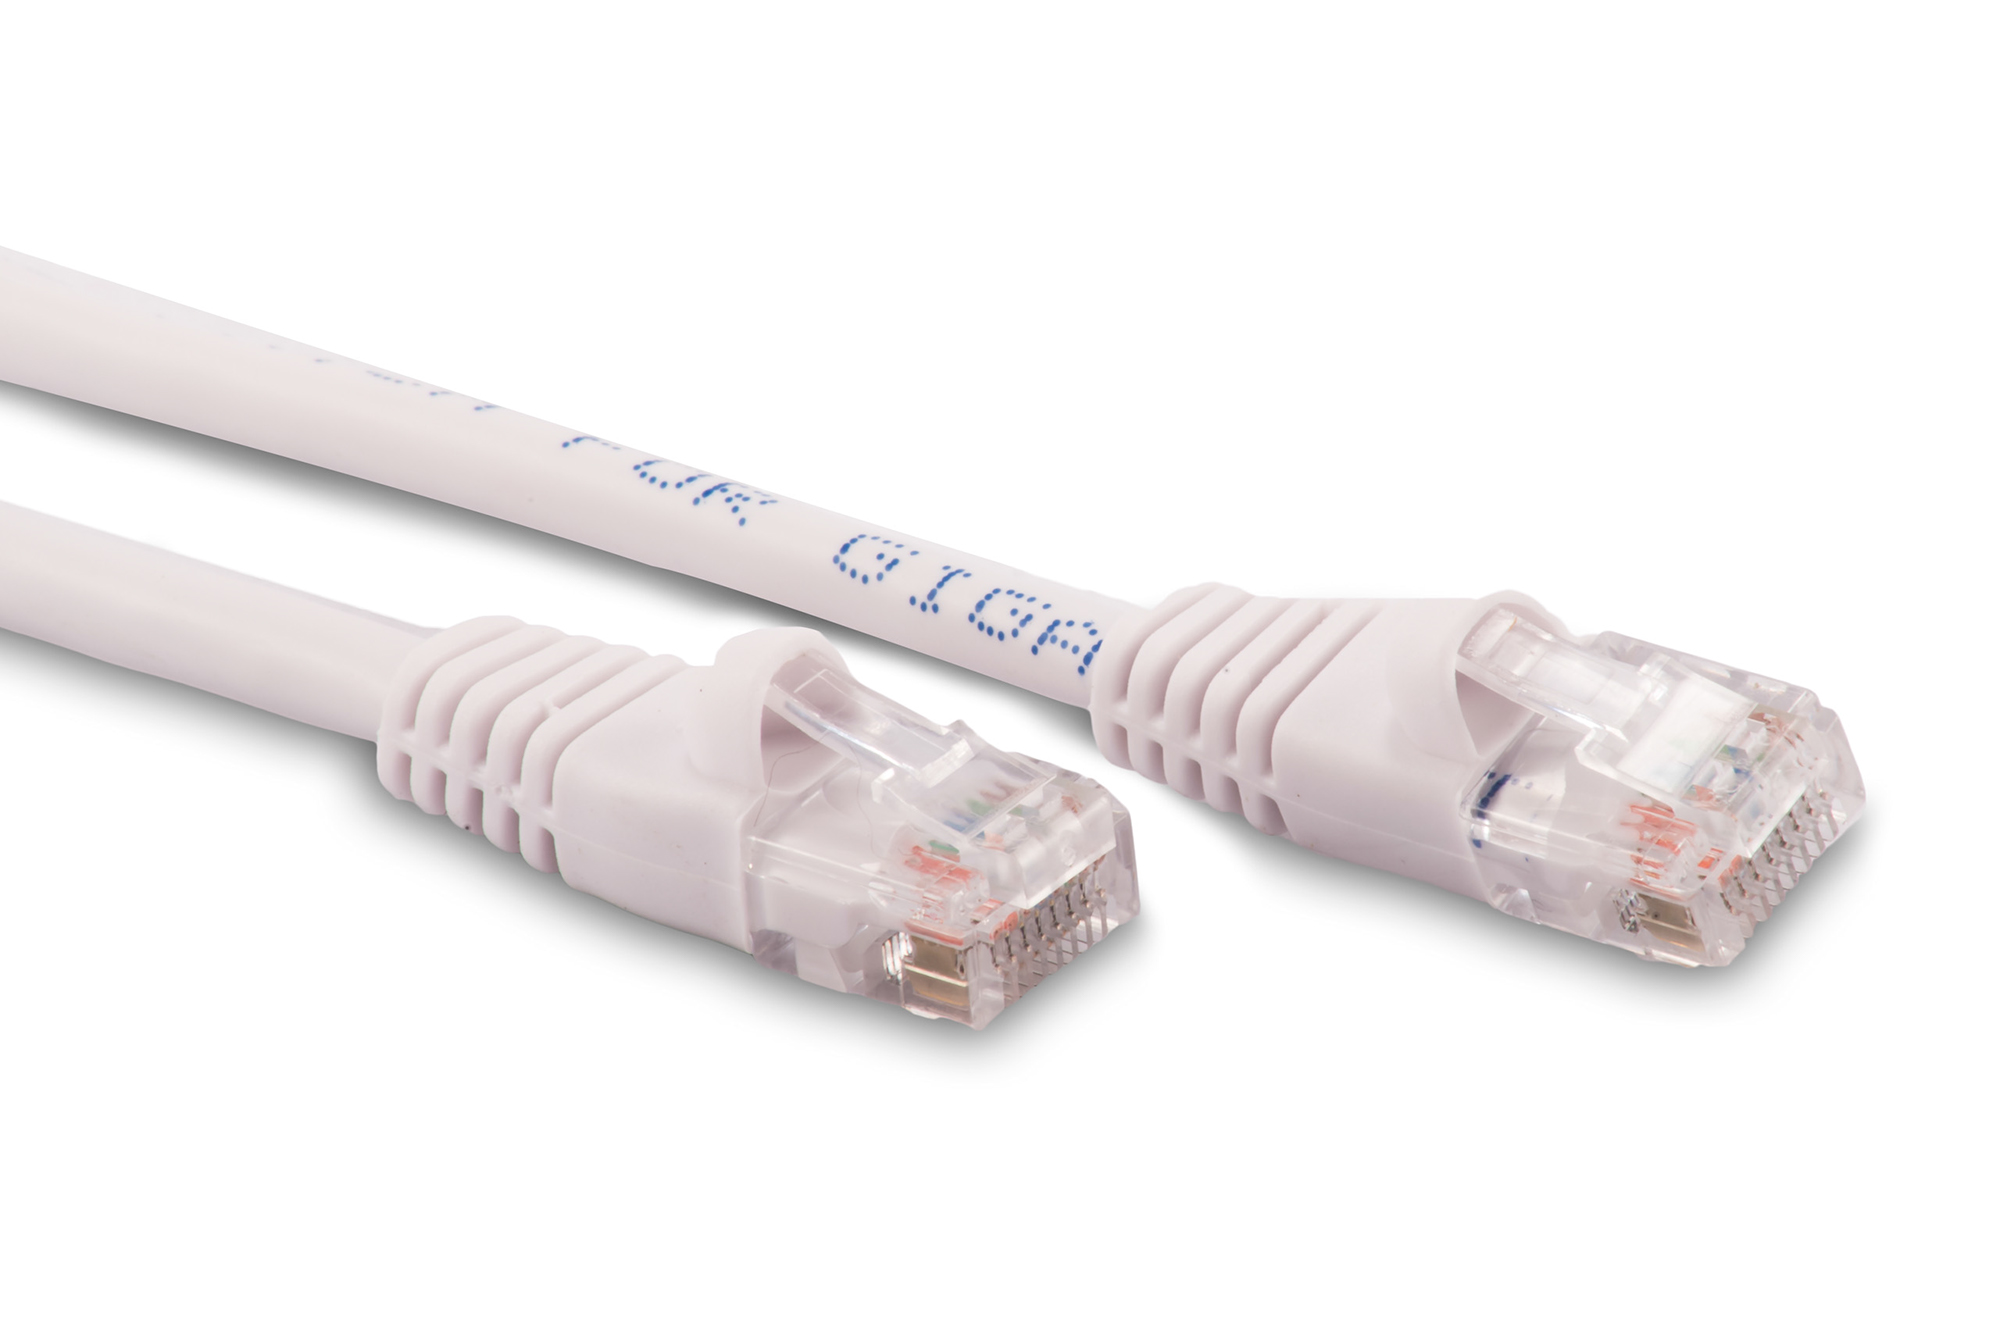 12ft Cat6 Ethernet Patch Cable - White Color - Snagless Boot